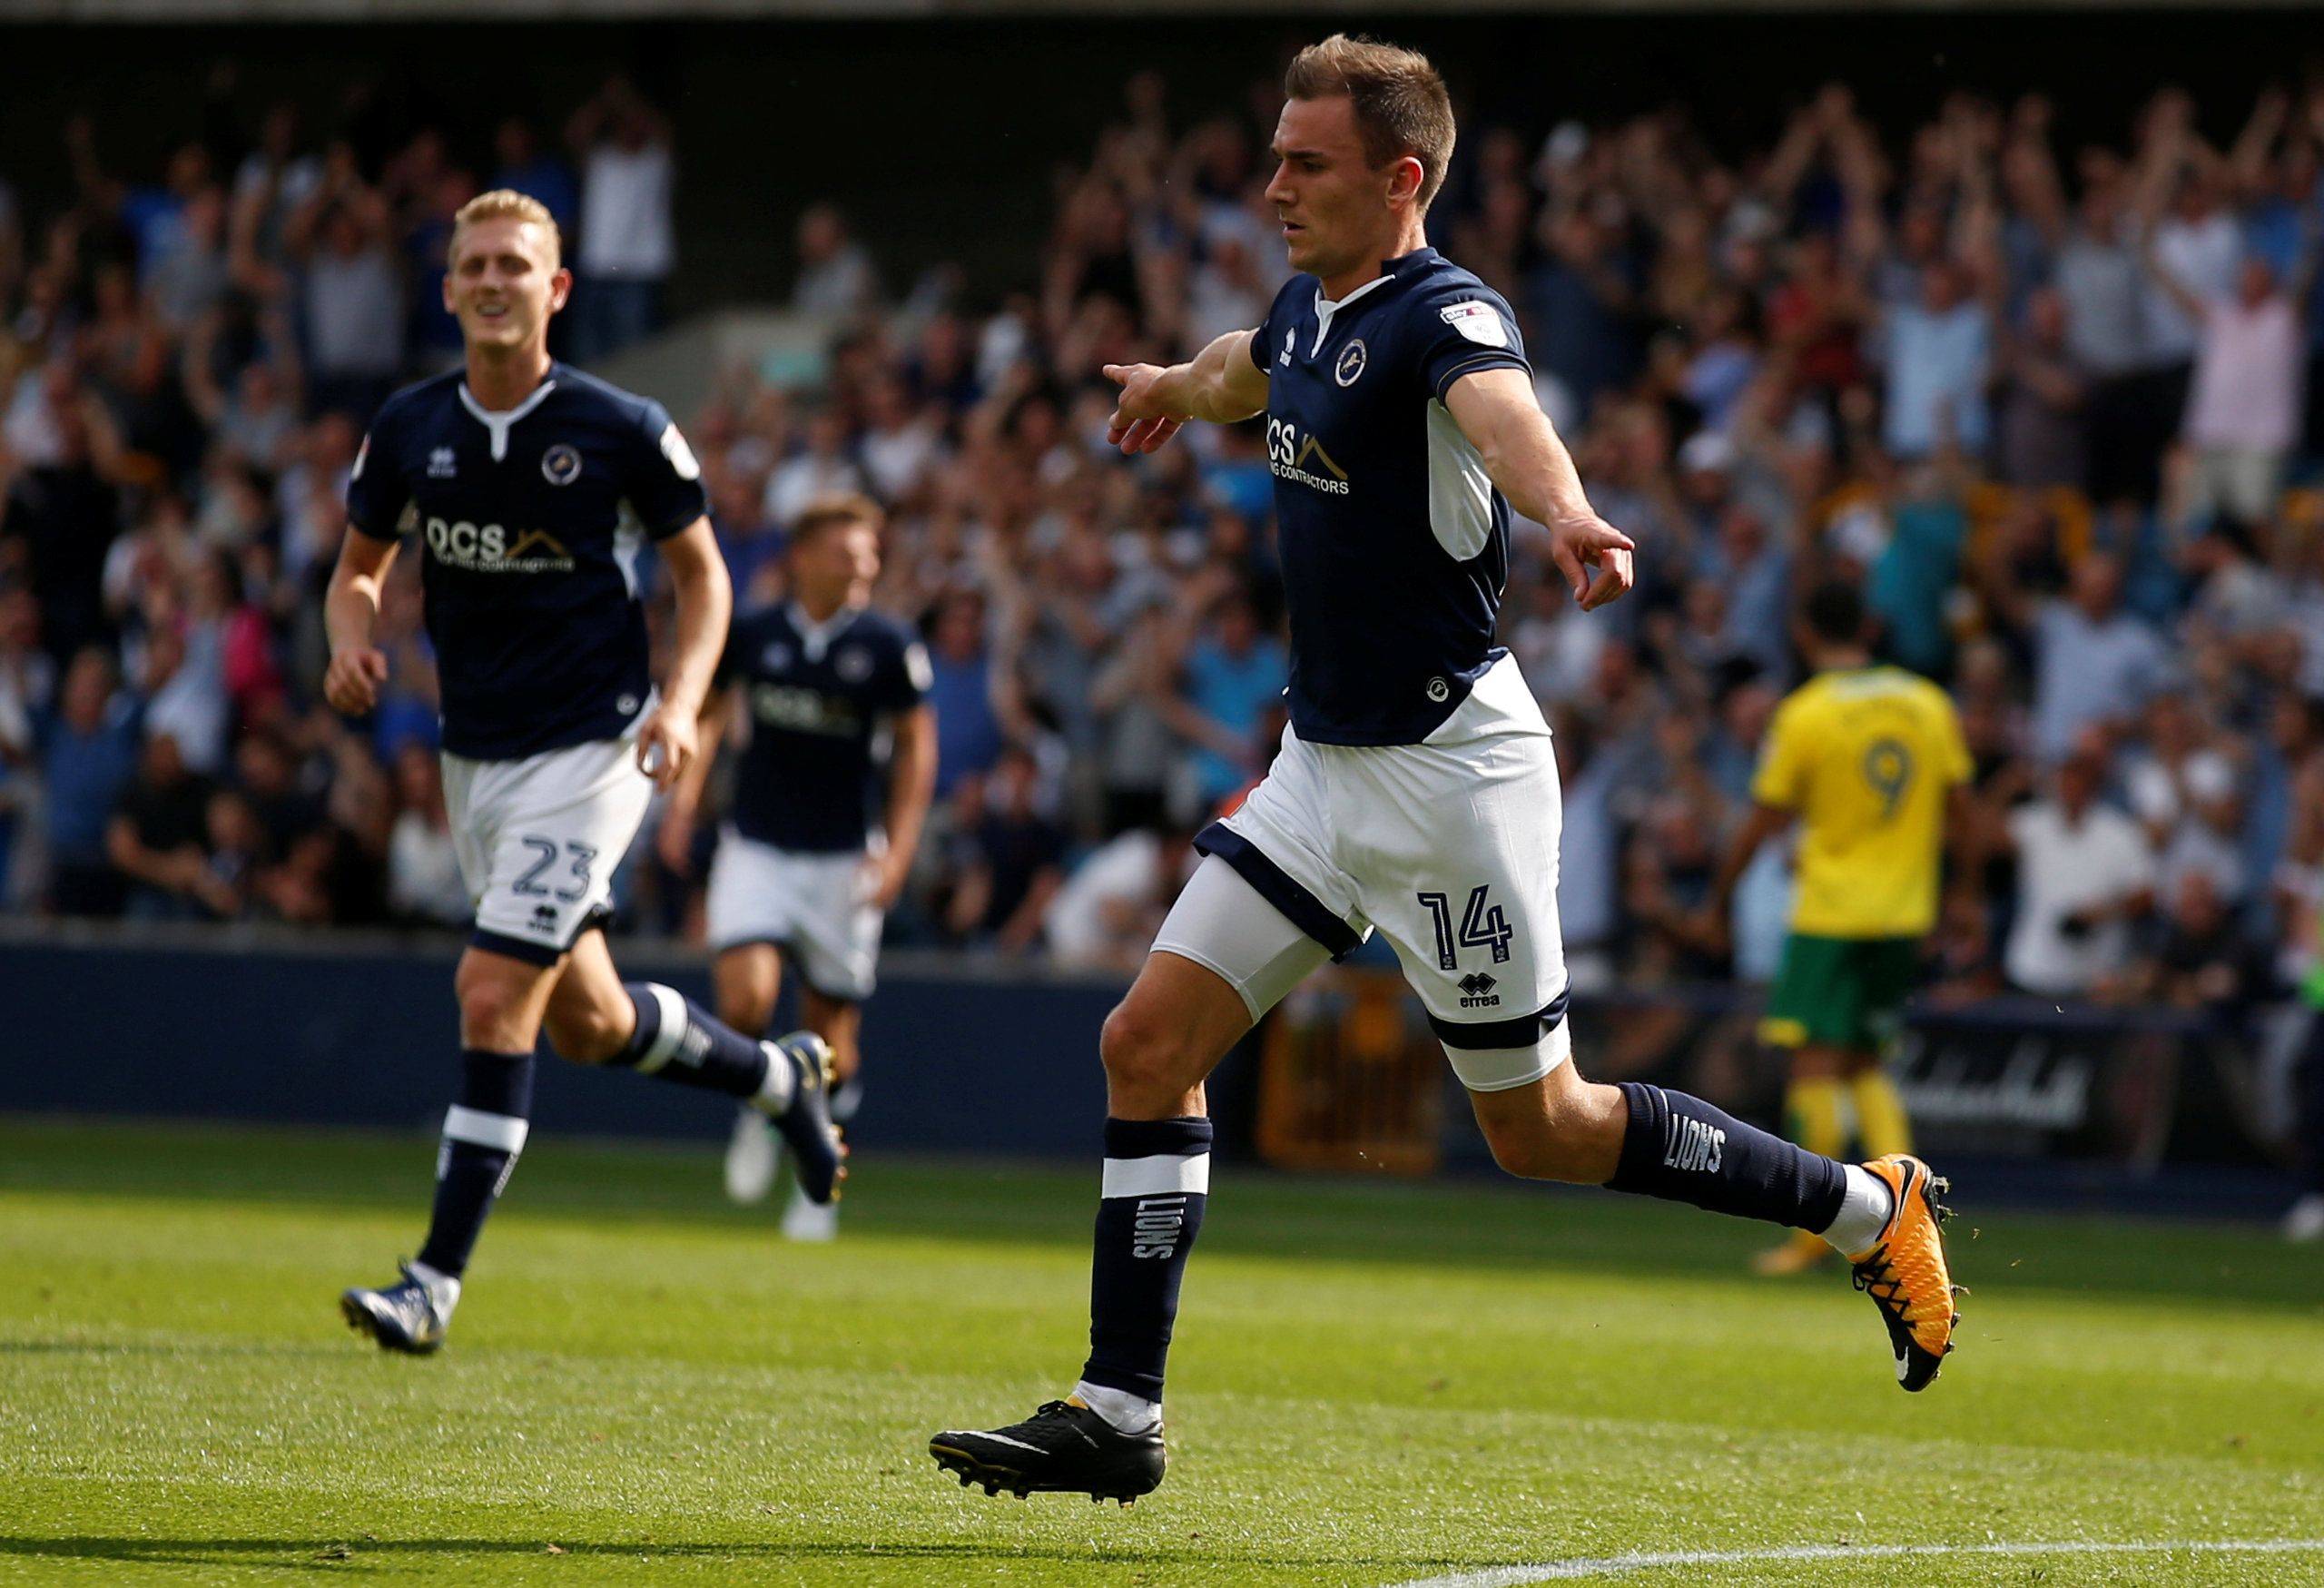 Soccer Football - Championship - Millwall vs Norwich City - London, Britain - August 26, 2017   Millwall's Jed Wallace celebrates scoring their third goal   Action Images/Peter Cziborra    EDITORIAL USE ONLY. No use with unauthorized audio, video, data, fixture lists, club/league logos or 